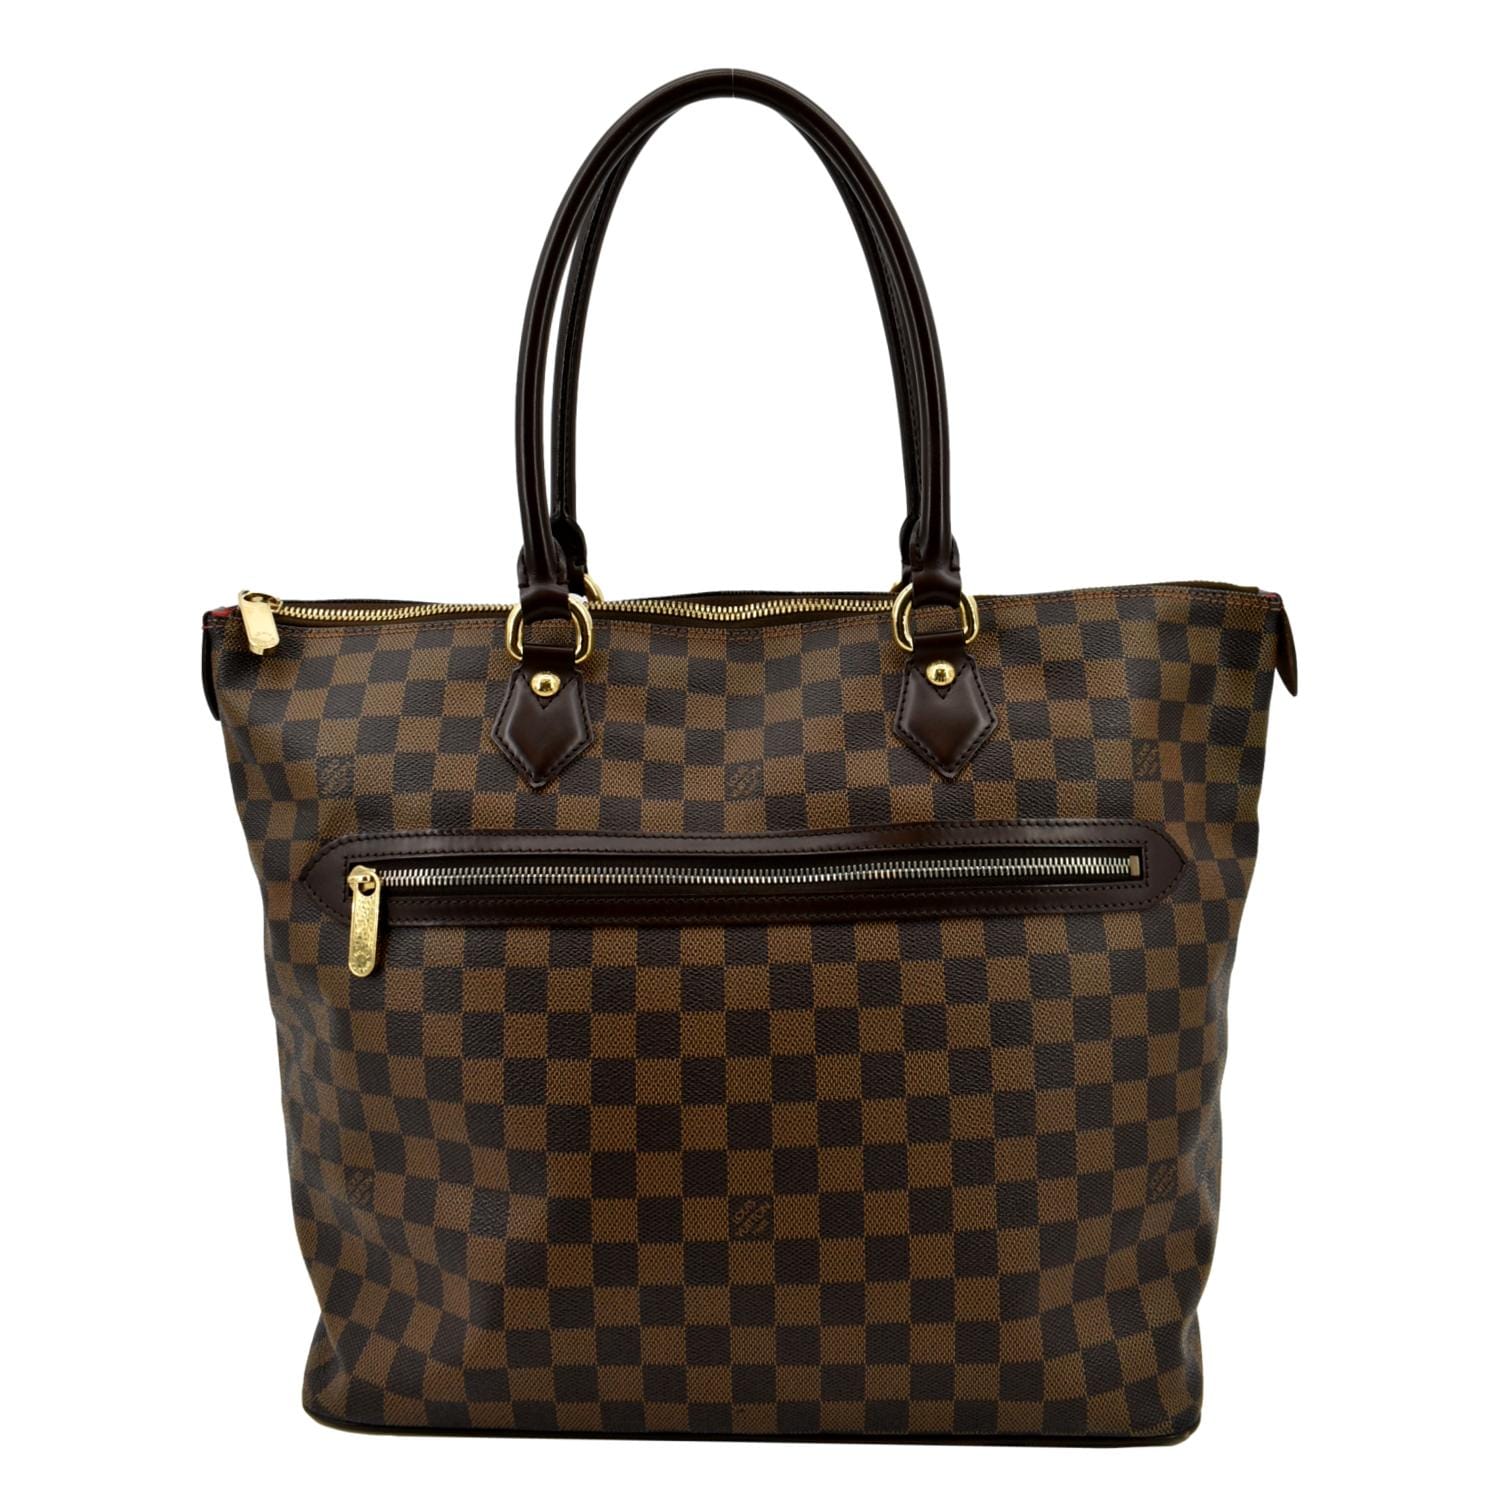 Authentic Louis Vuitton Damier Azur Saleya GM Bag  How to Spot Authentic  Saleya and What Can Fit? 